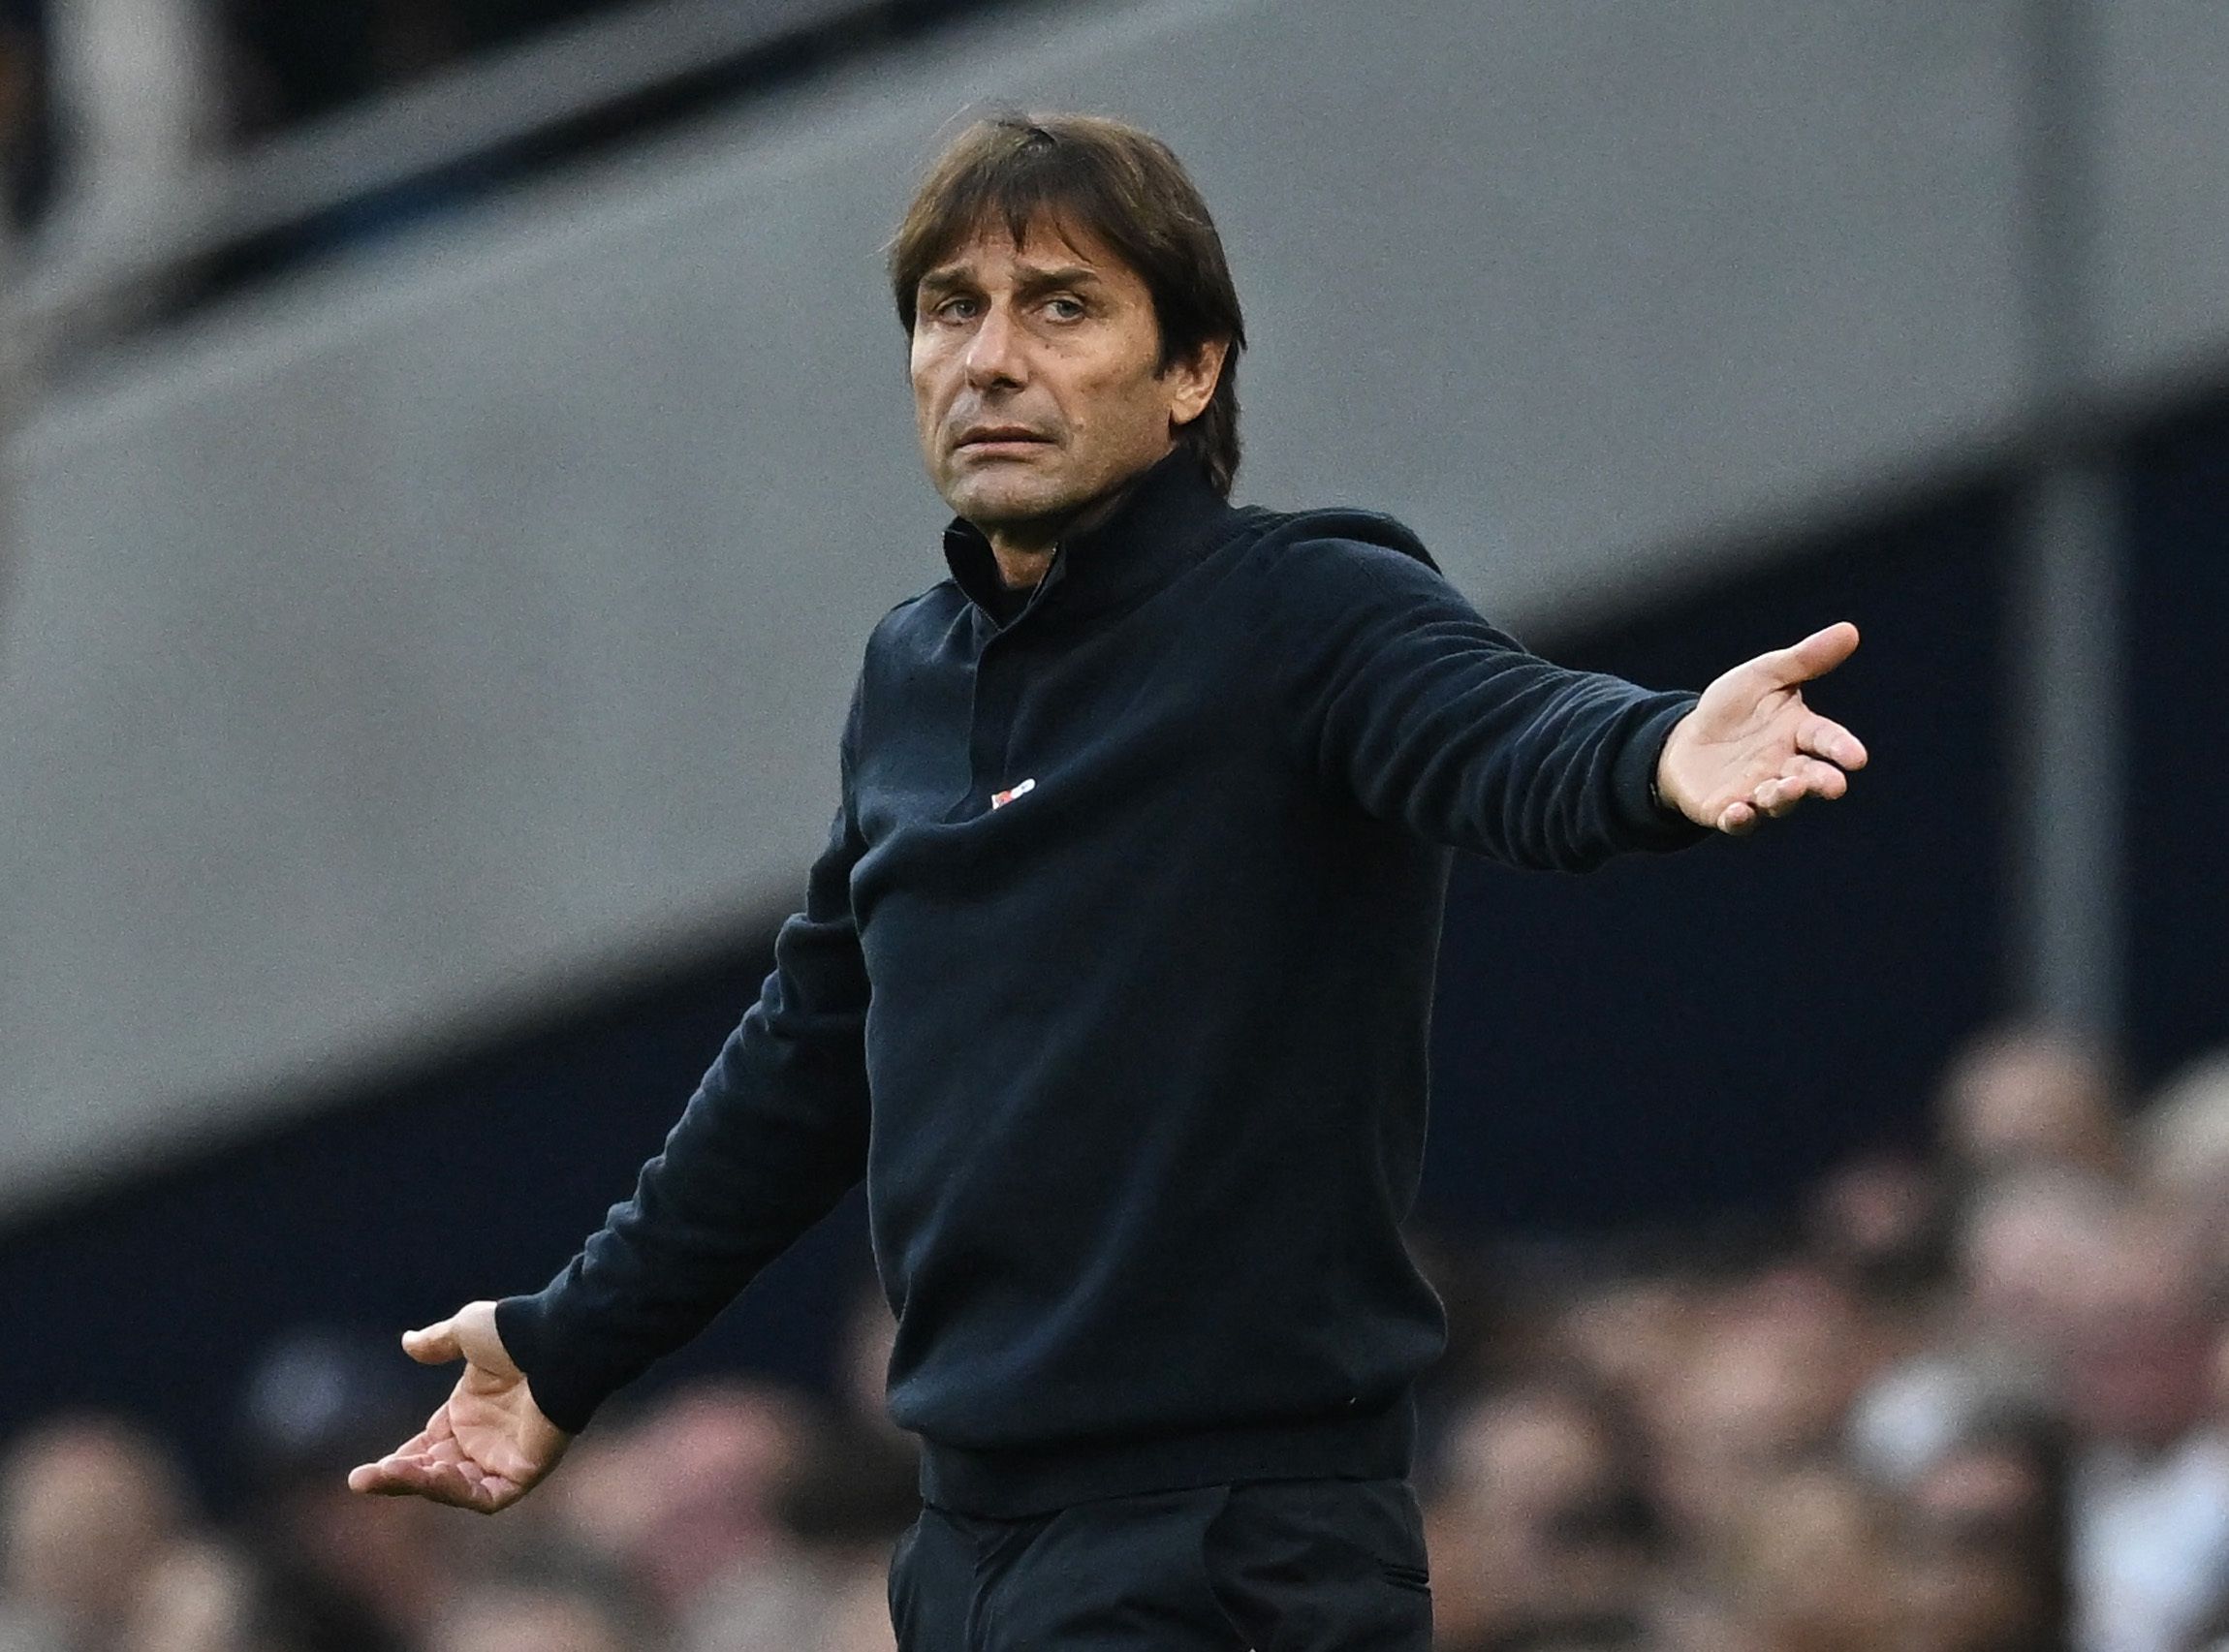 Tottenham: Conte can plan with Paratici and Levy ahead of January -Follow up